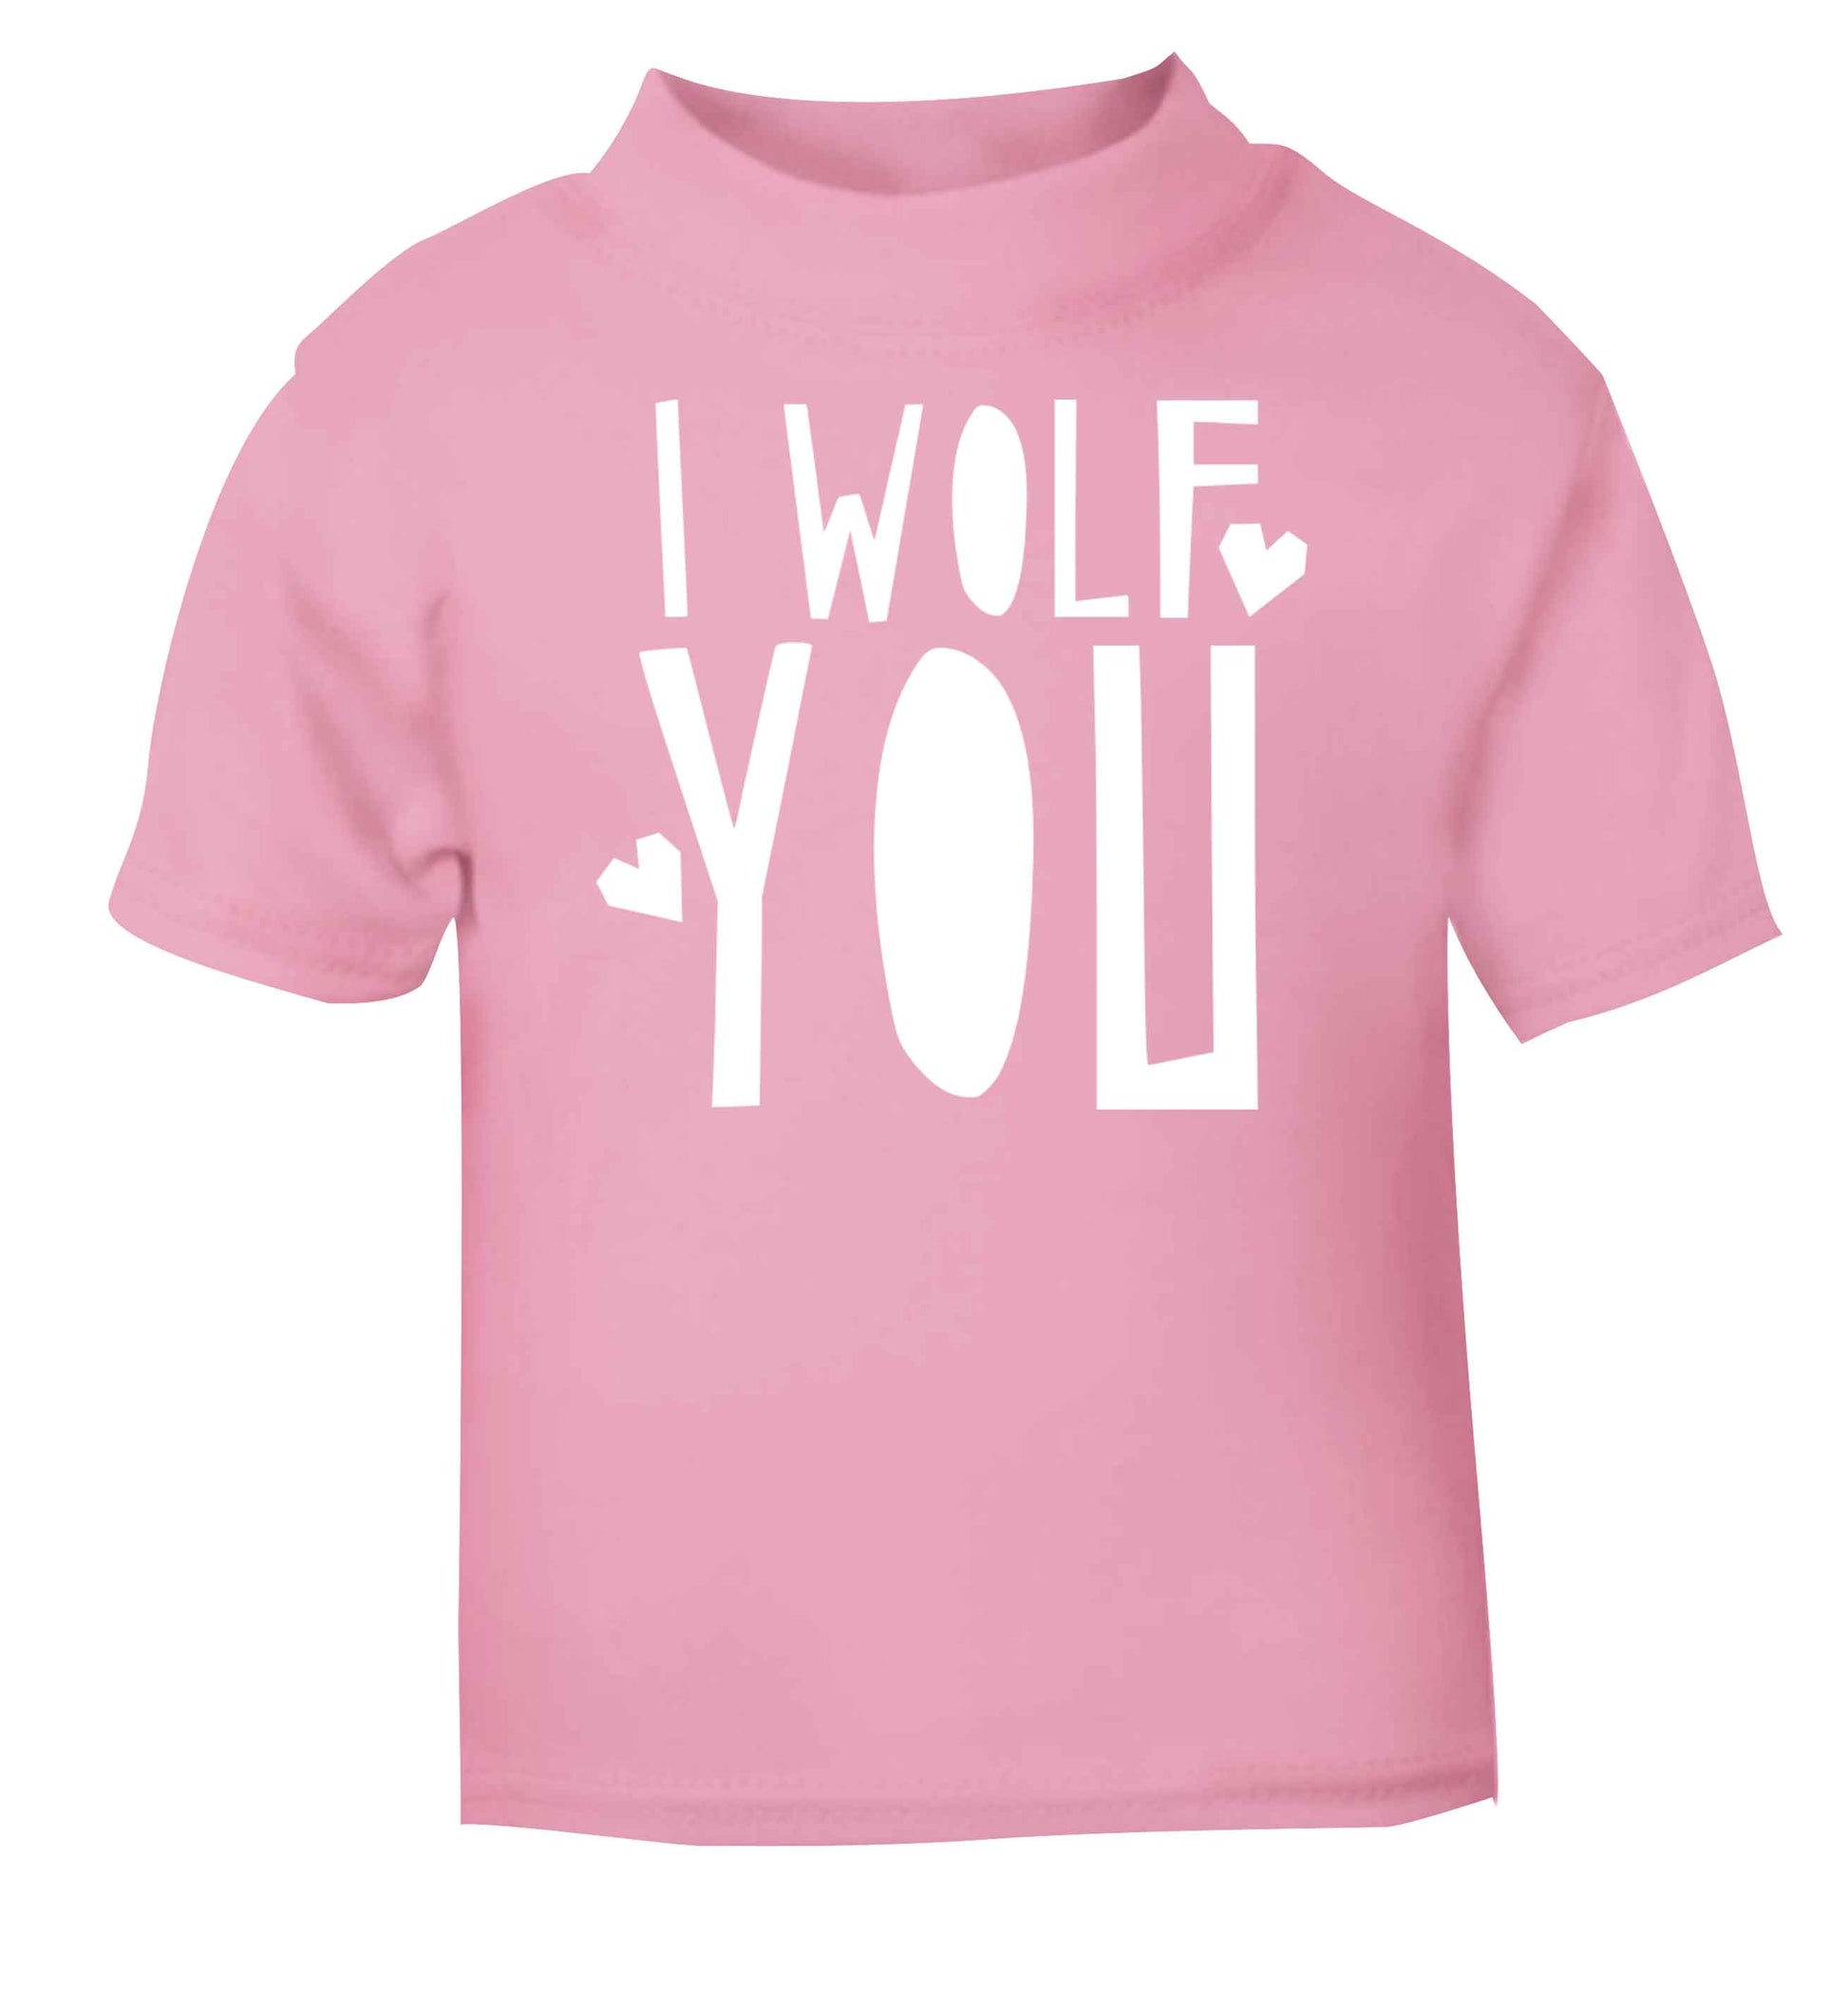 I wolf you light pink baby toddler Tshirt 2 Years